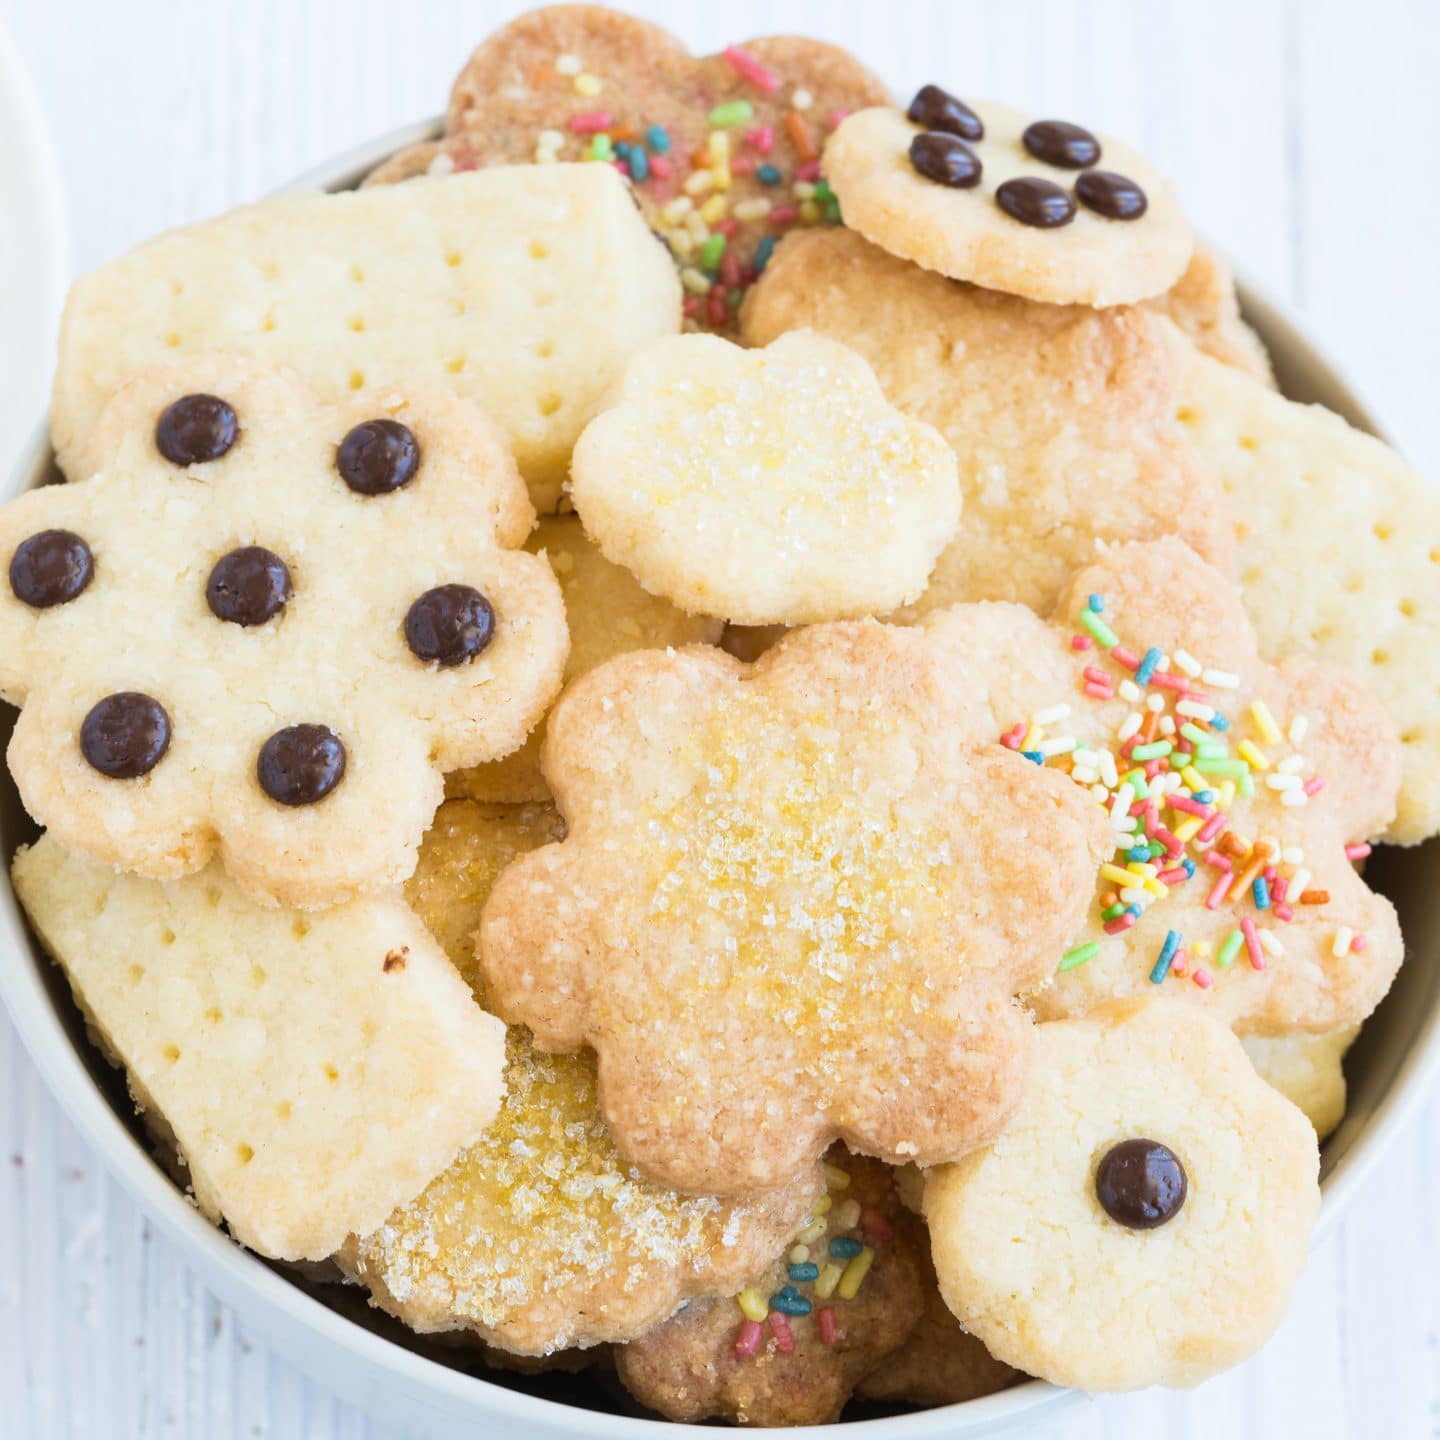 https://www.baking4happiness.com/wp-content/uploads/2020/08/3-ingredients-biscuits-recipe-scaled.jpg